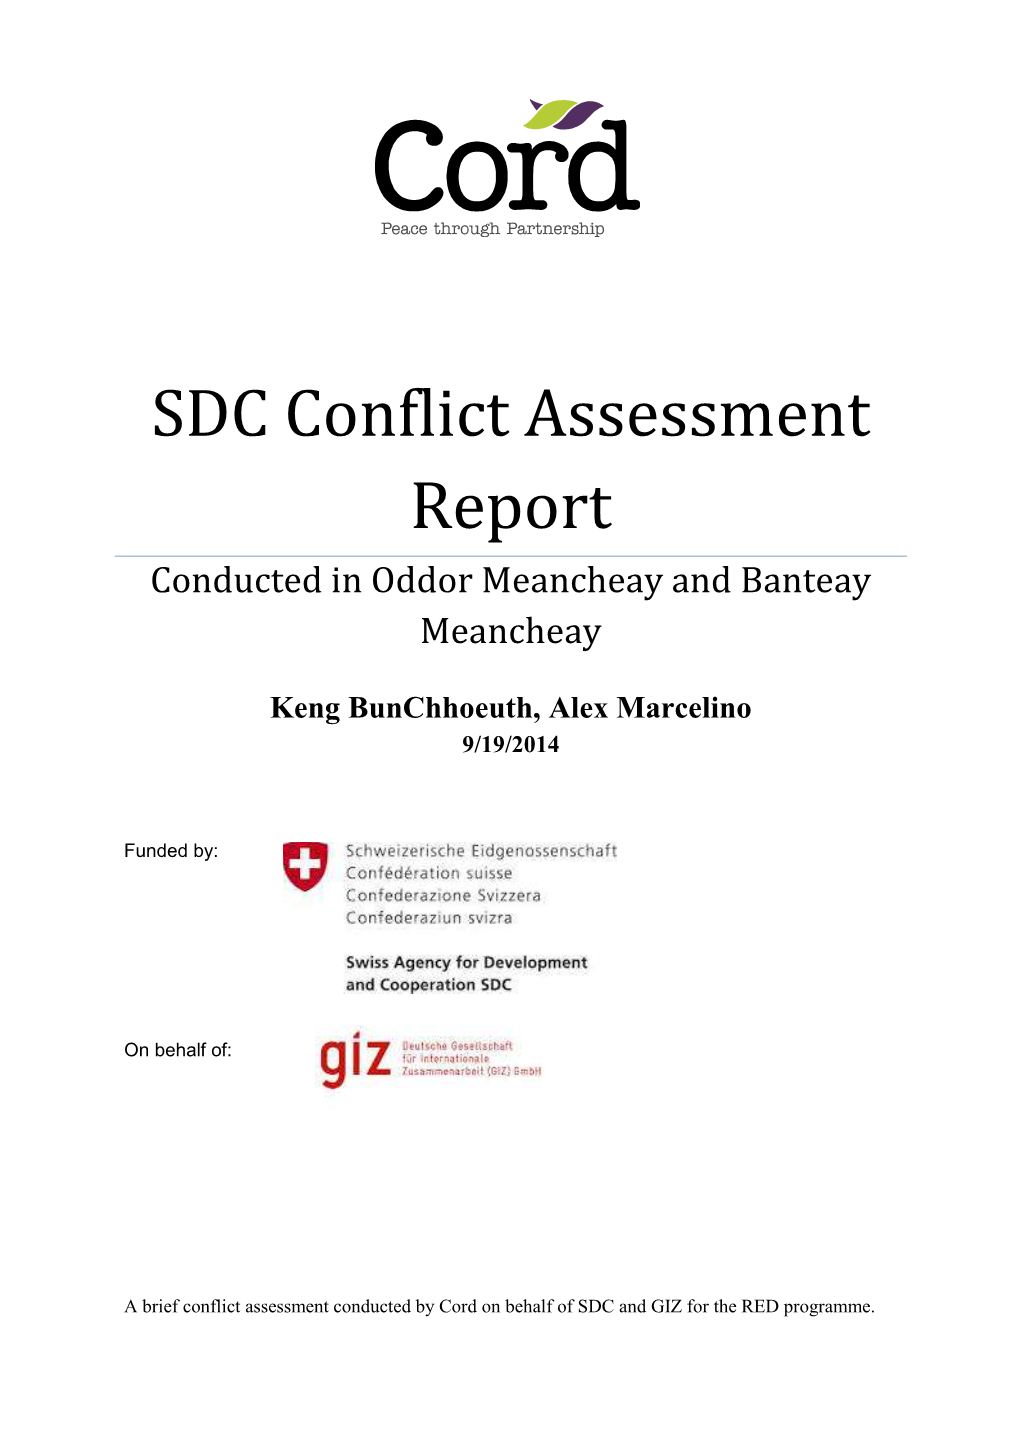 Conflict Assessment Final Report-Submited to SDC-141027